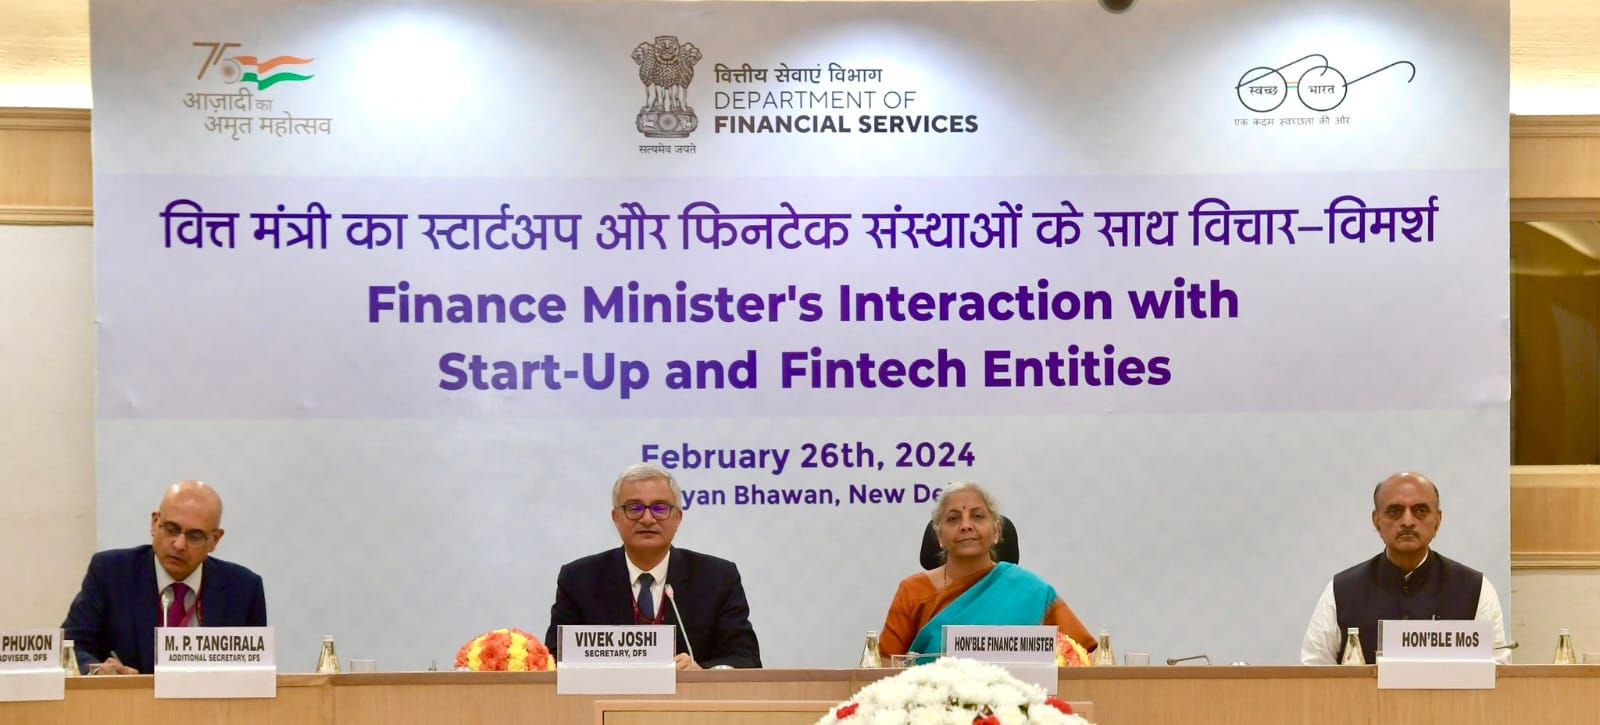 Finance Minister asks regulators to hold monthly meetings with startups and fintech firms to address concerns